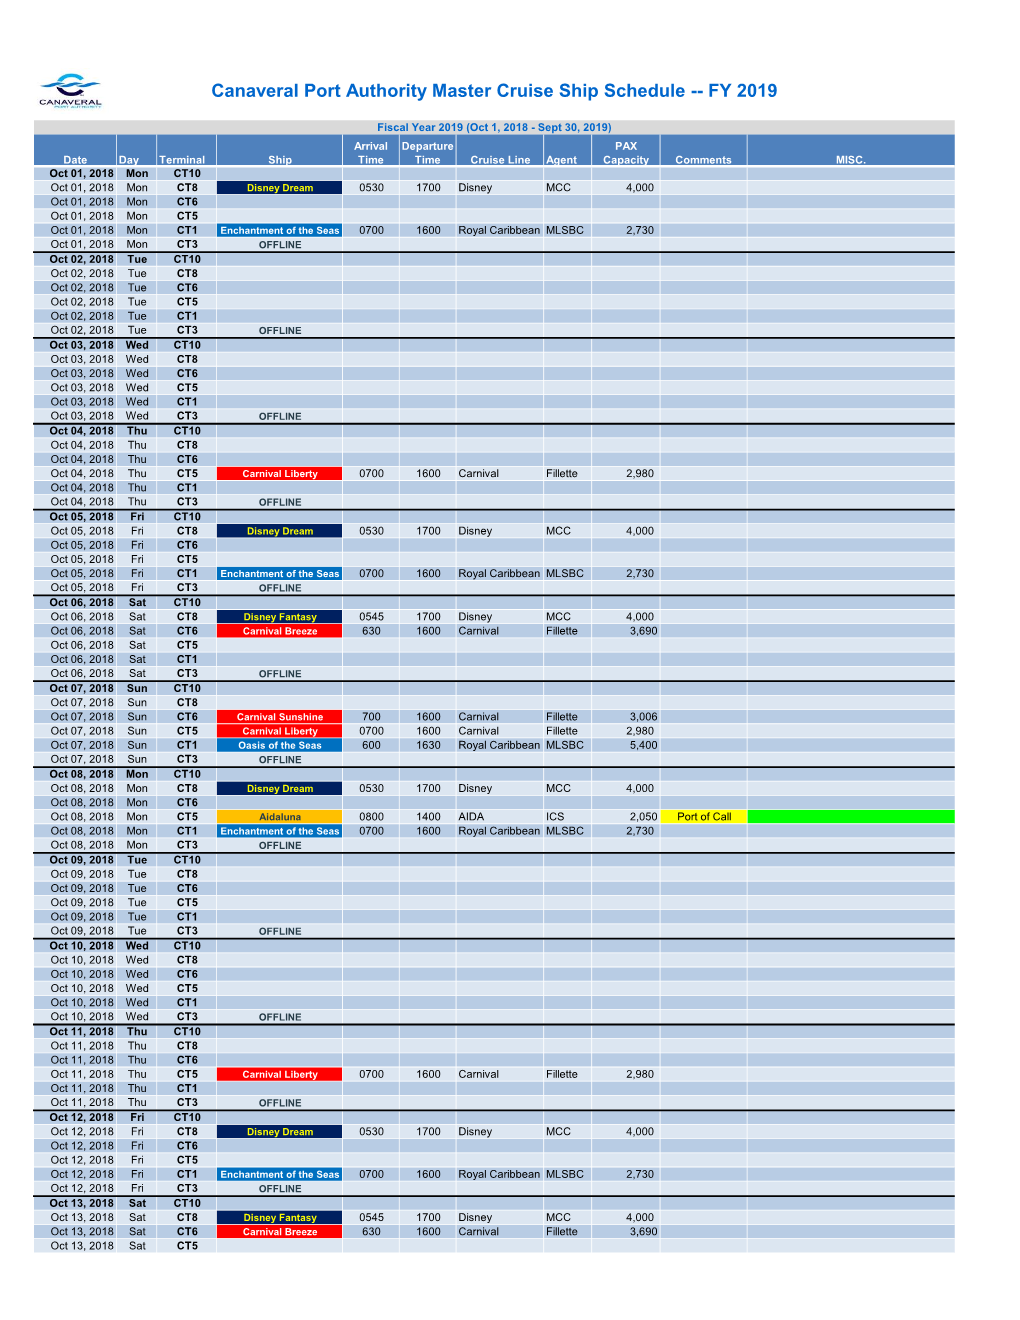 Canaveral Port Authority Master Cruise Ship Schedule FY 2019 DocsLib